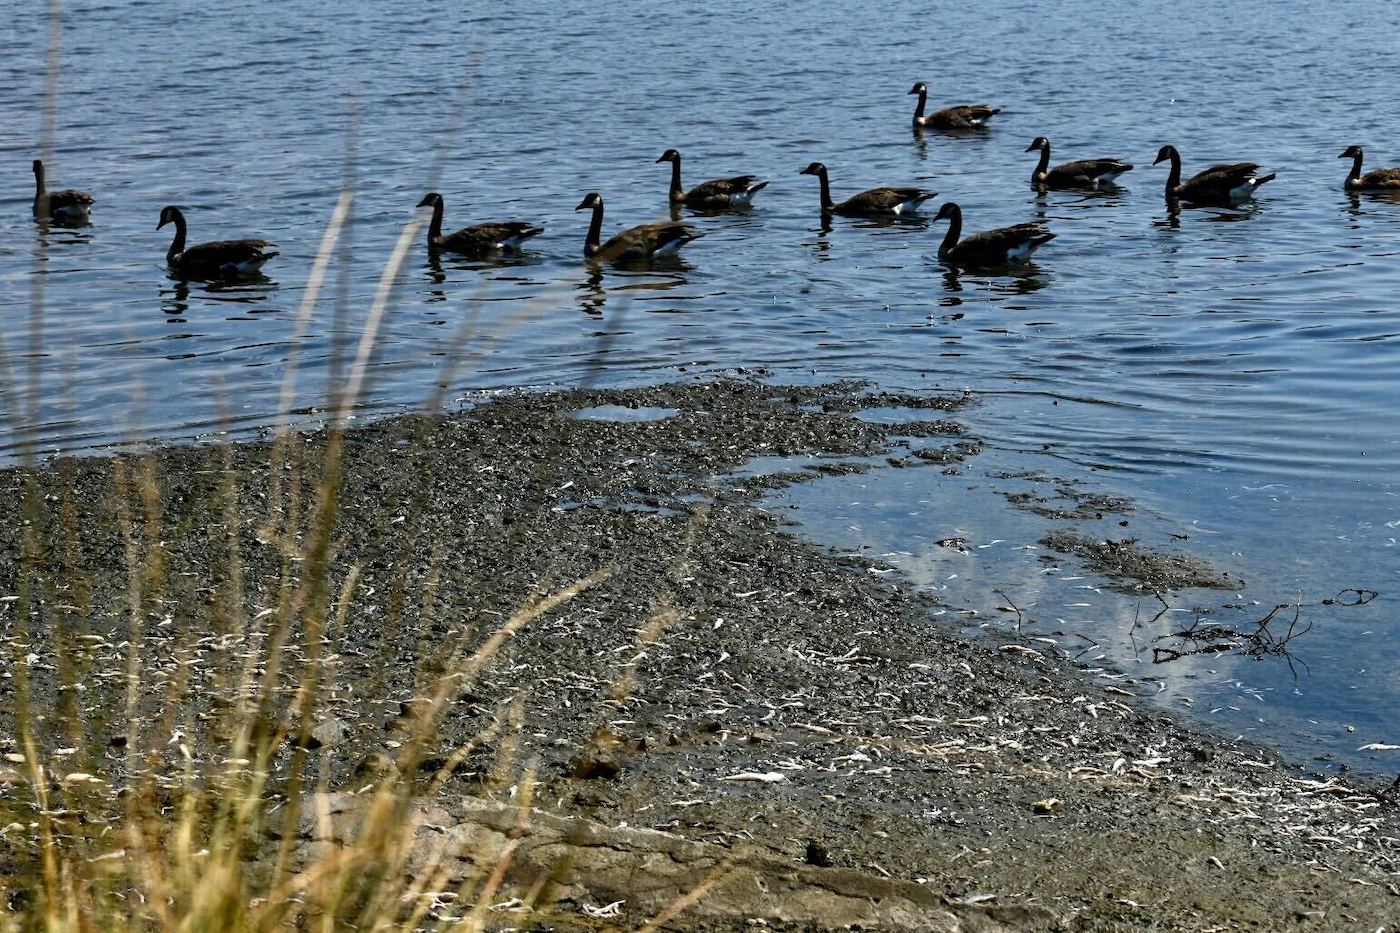 11 geese swim a few meters from a muddy shore where the remains of fish lie.